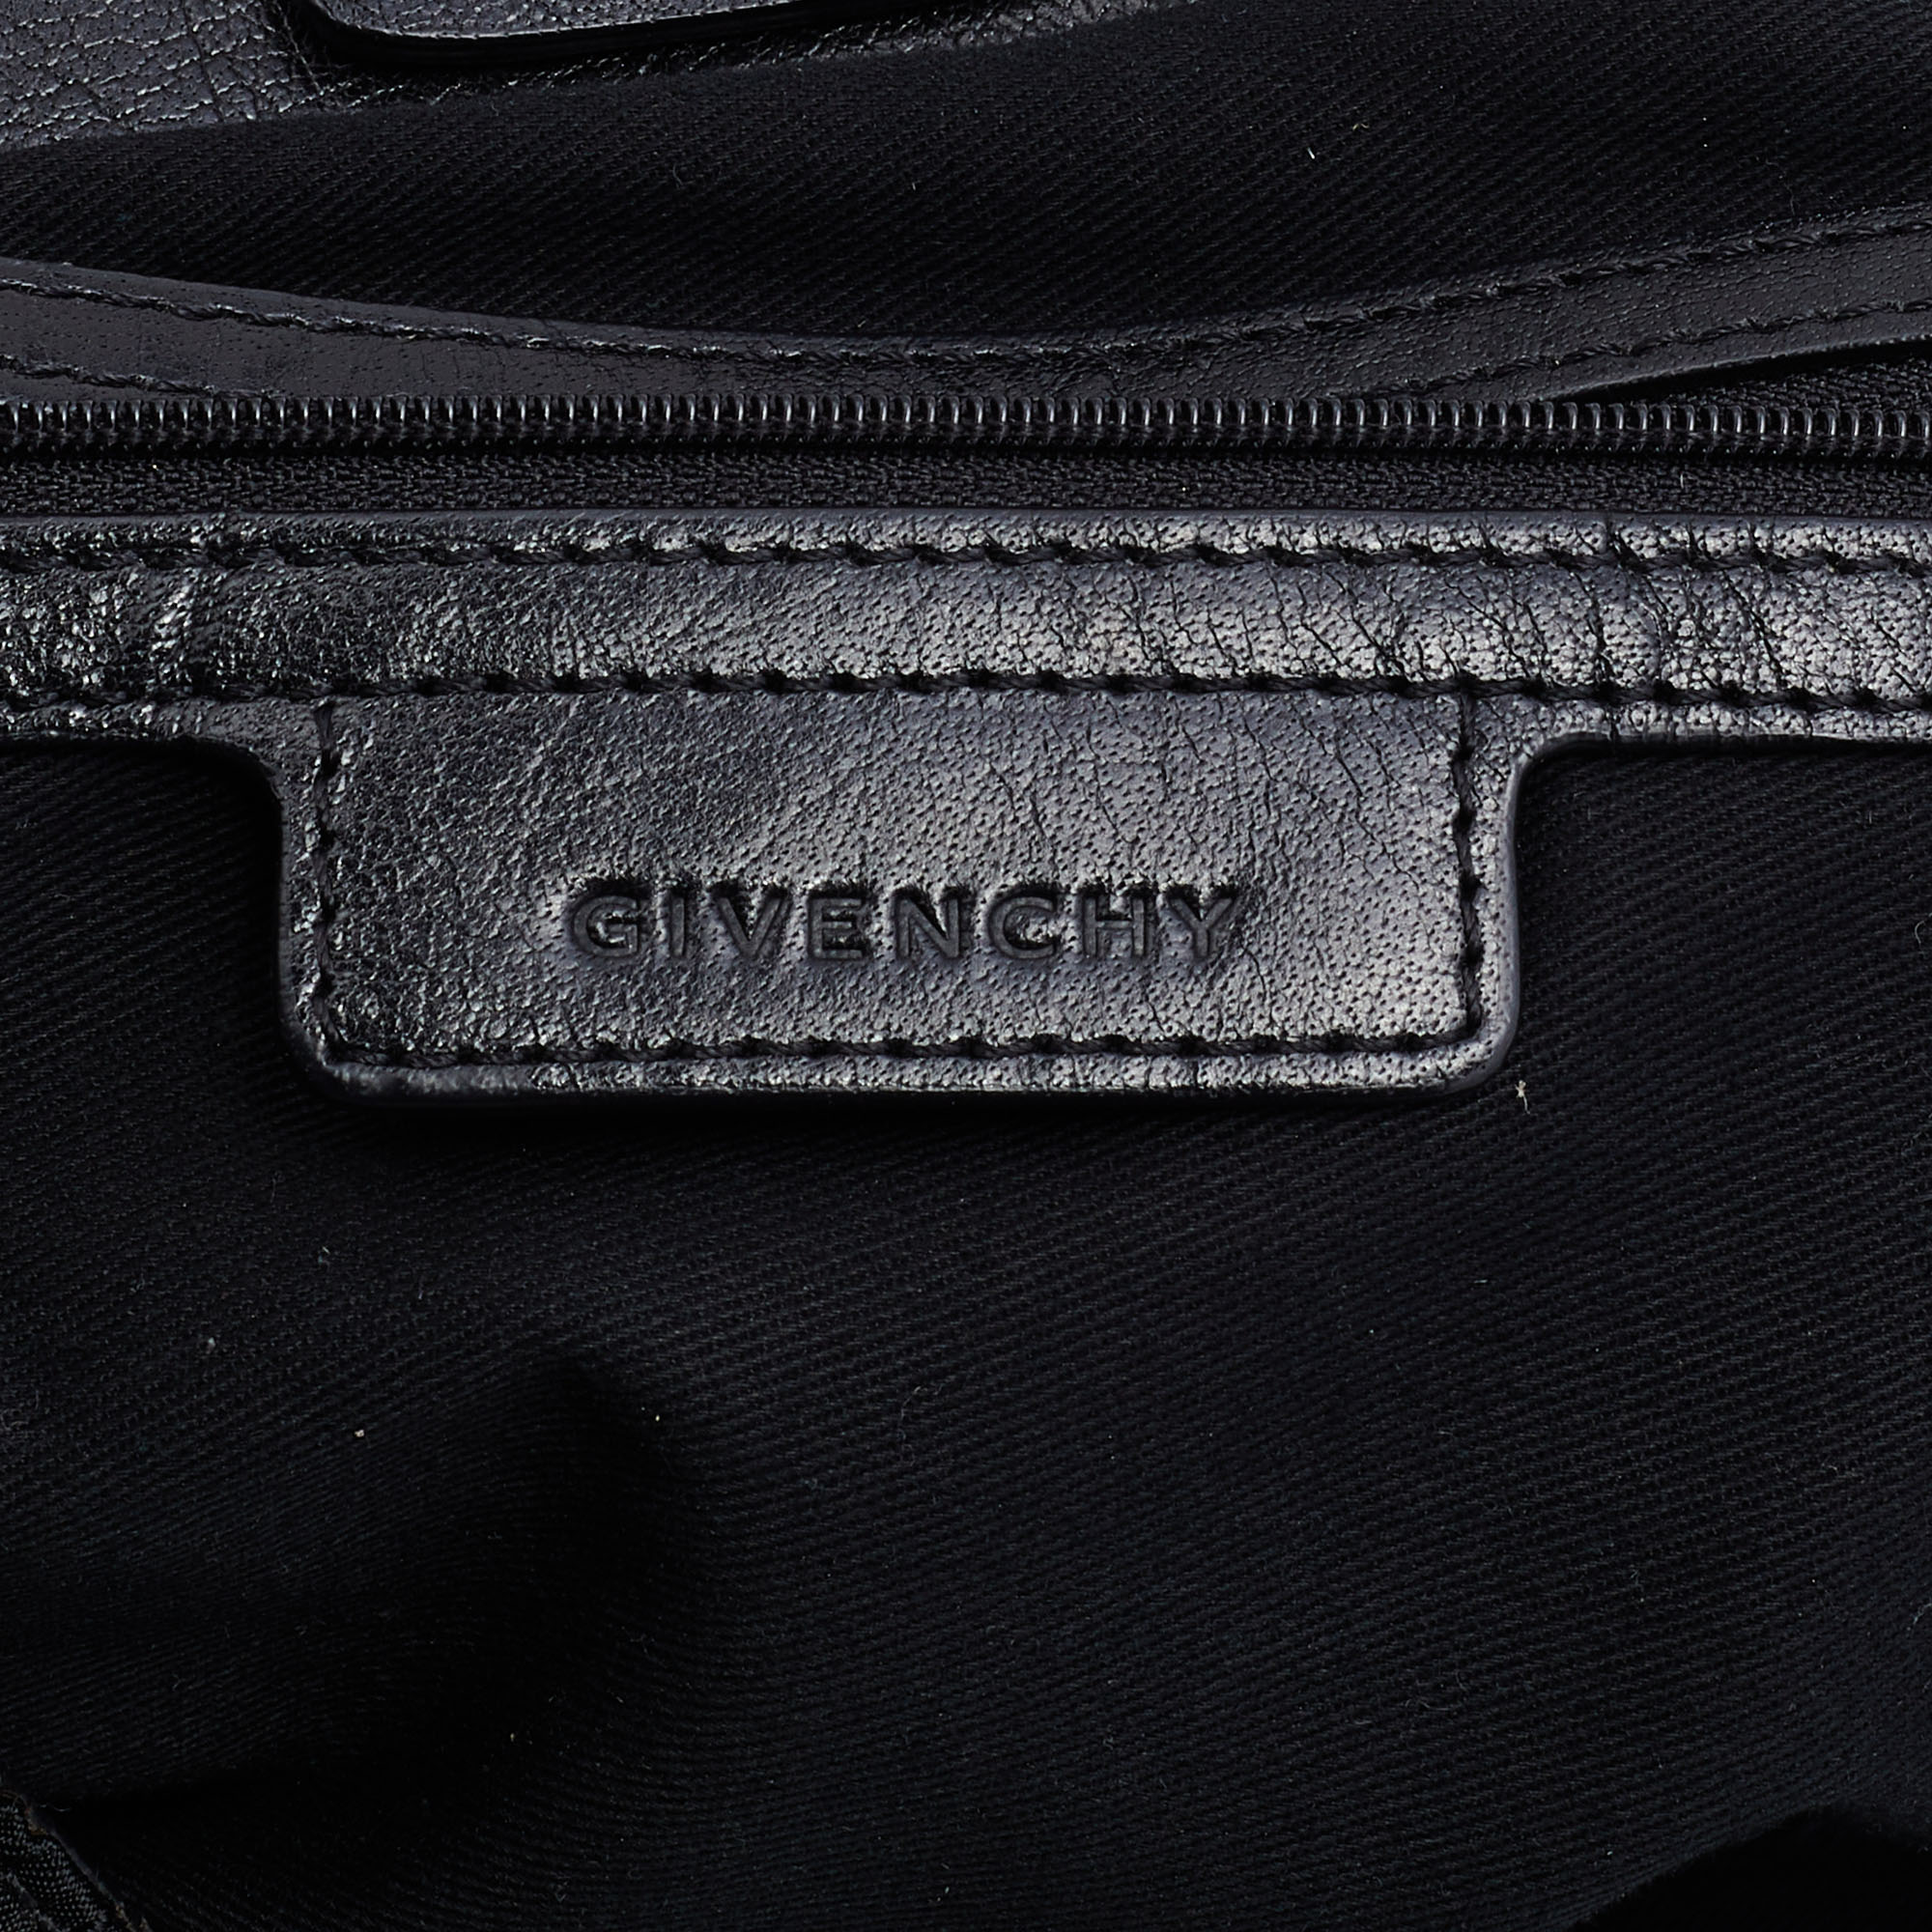 Givenchy Black Nylon And Leather Studded Tote